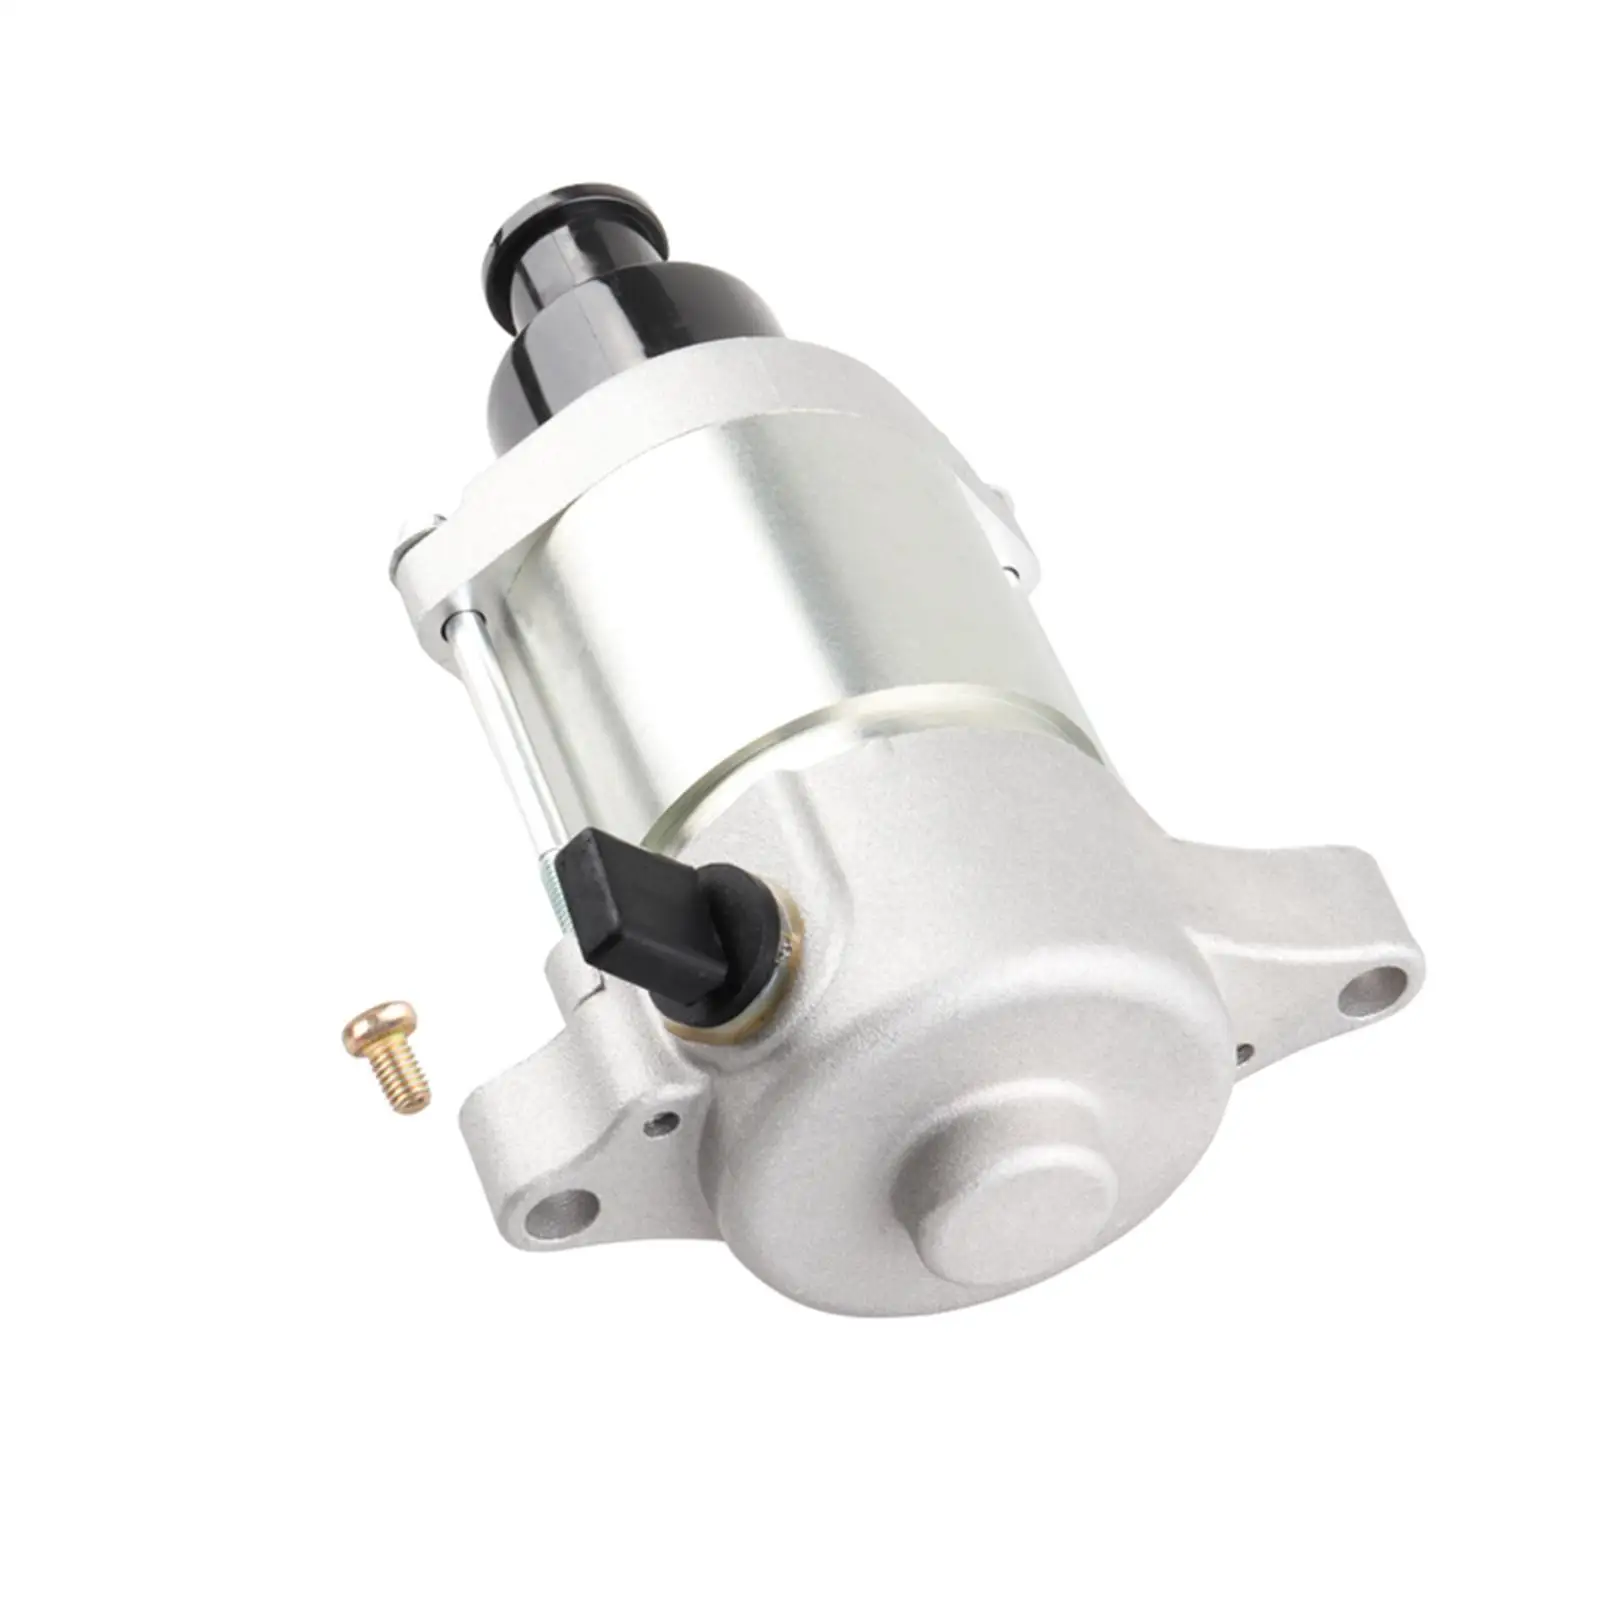 Engine Starting Starter Motor Assembly Repair Parts for Aprilia RXV450 RXV550 Sxv450 Sxv550 Convenient Installation Durable